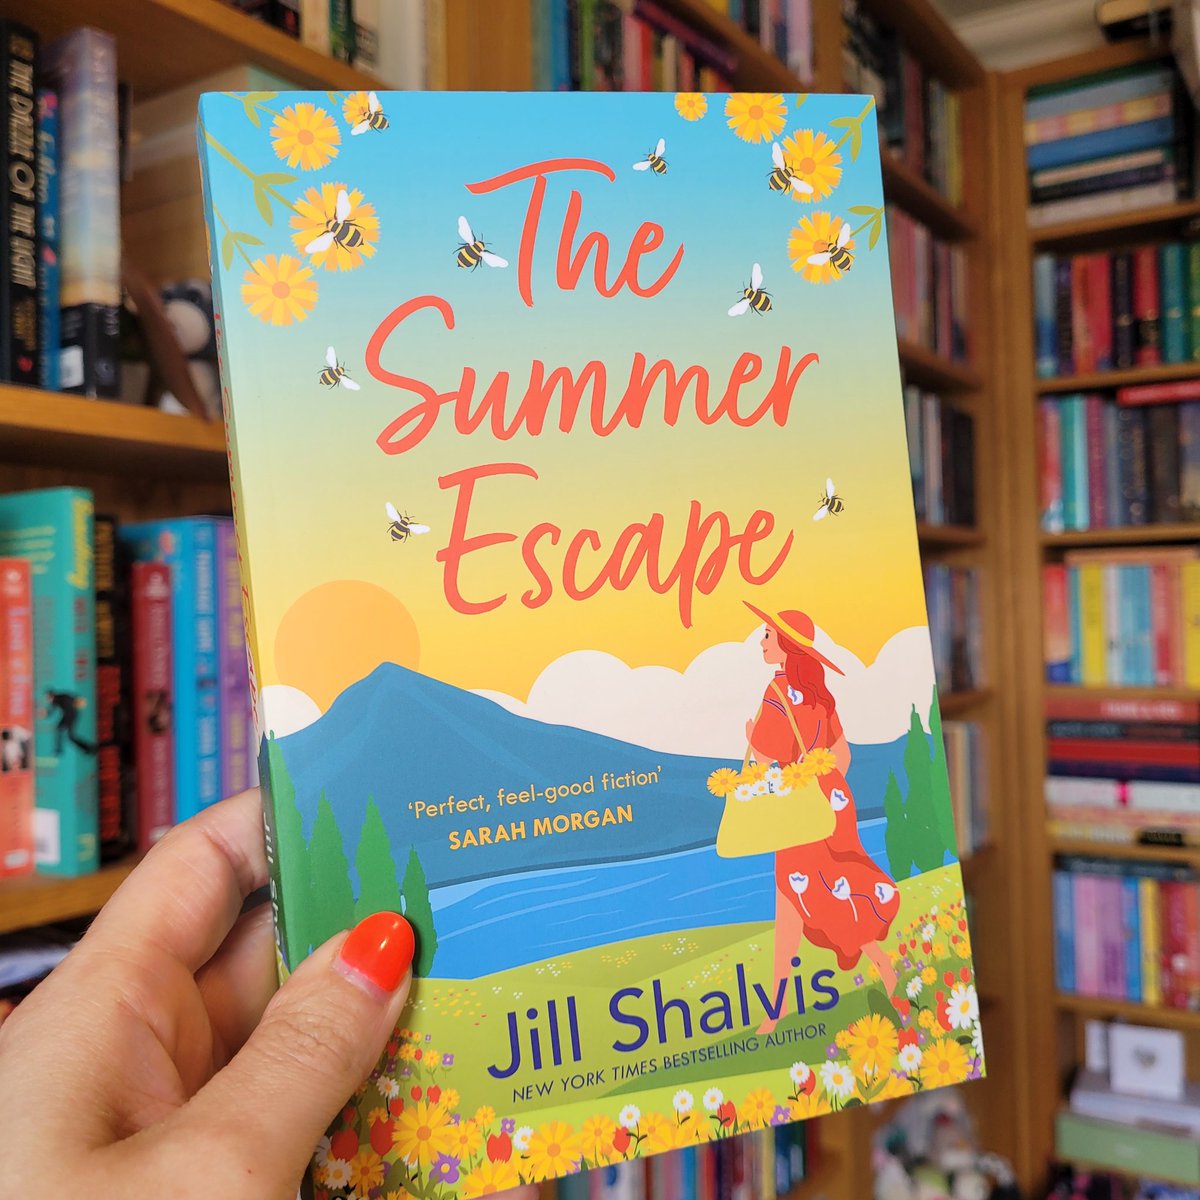 Book mail... The Summer Escape by Jill Shalvis Thanks so much for sending this my way @eternal_books I love Jill Shalvis books #bookmail #TheSummerEscape #bookx